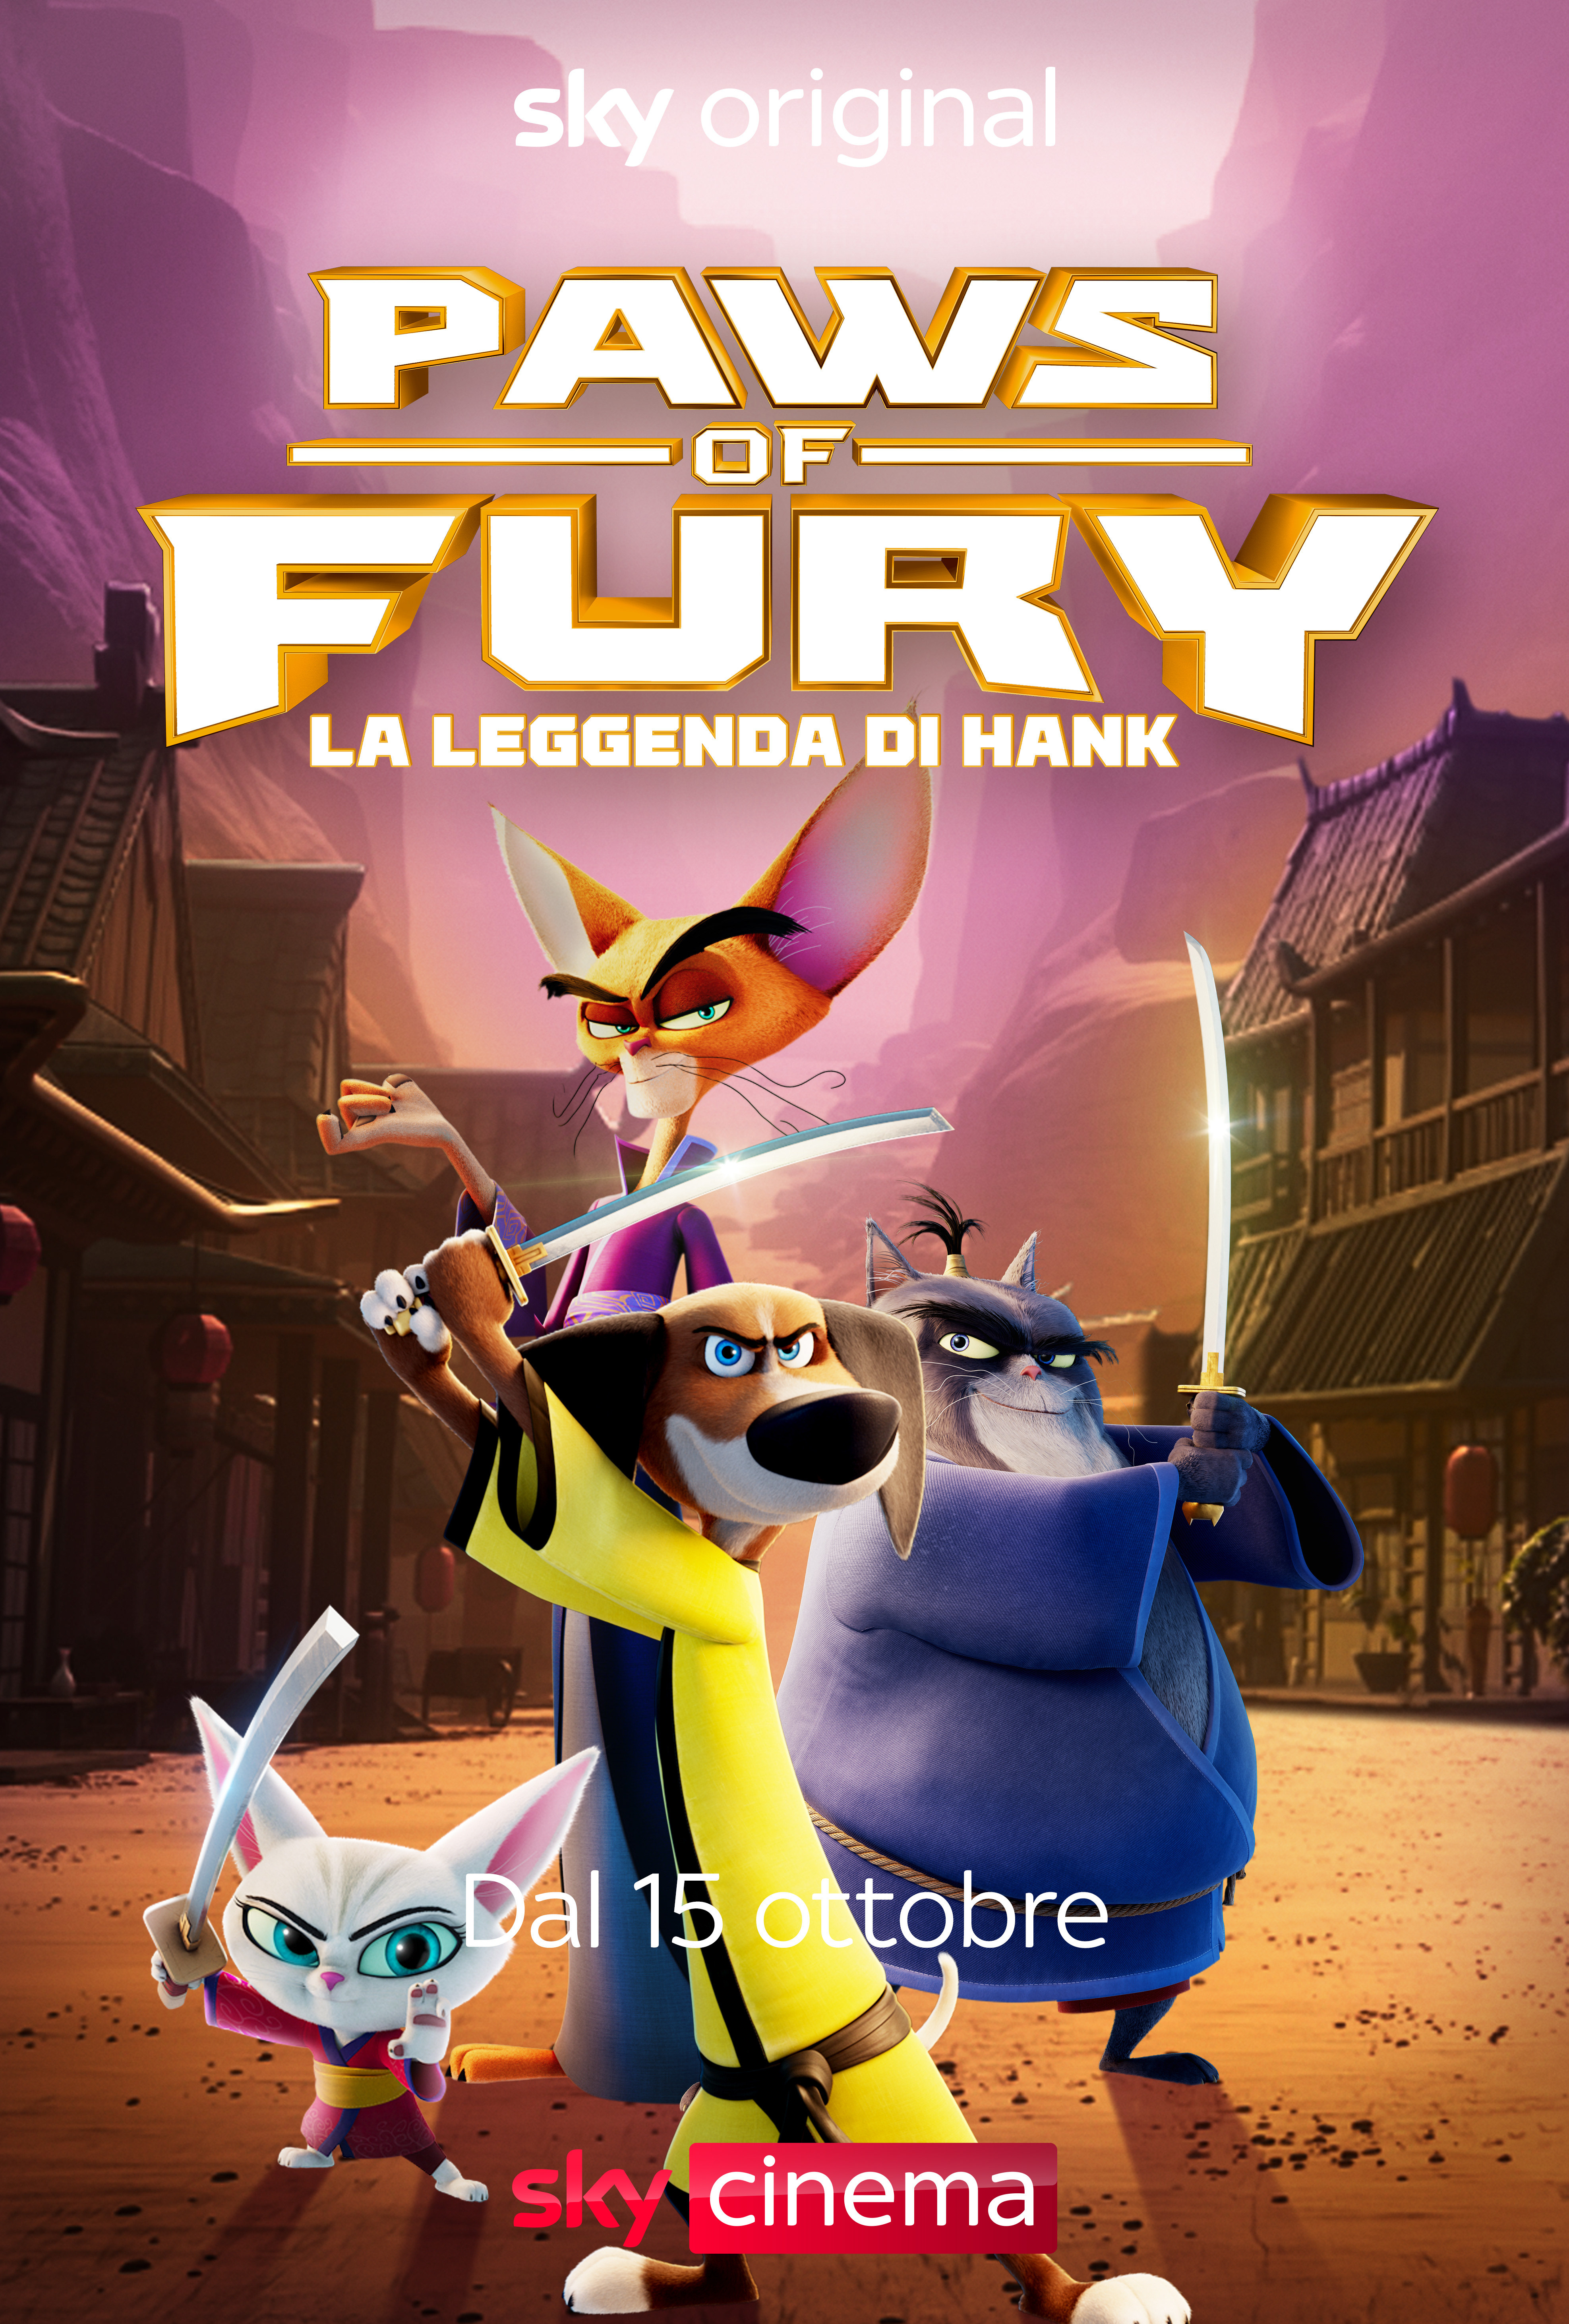 il poster di paws of fury - nerdface